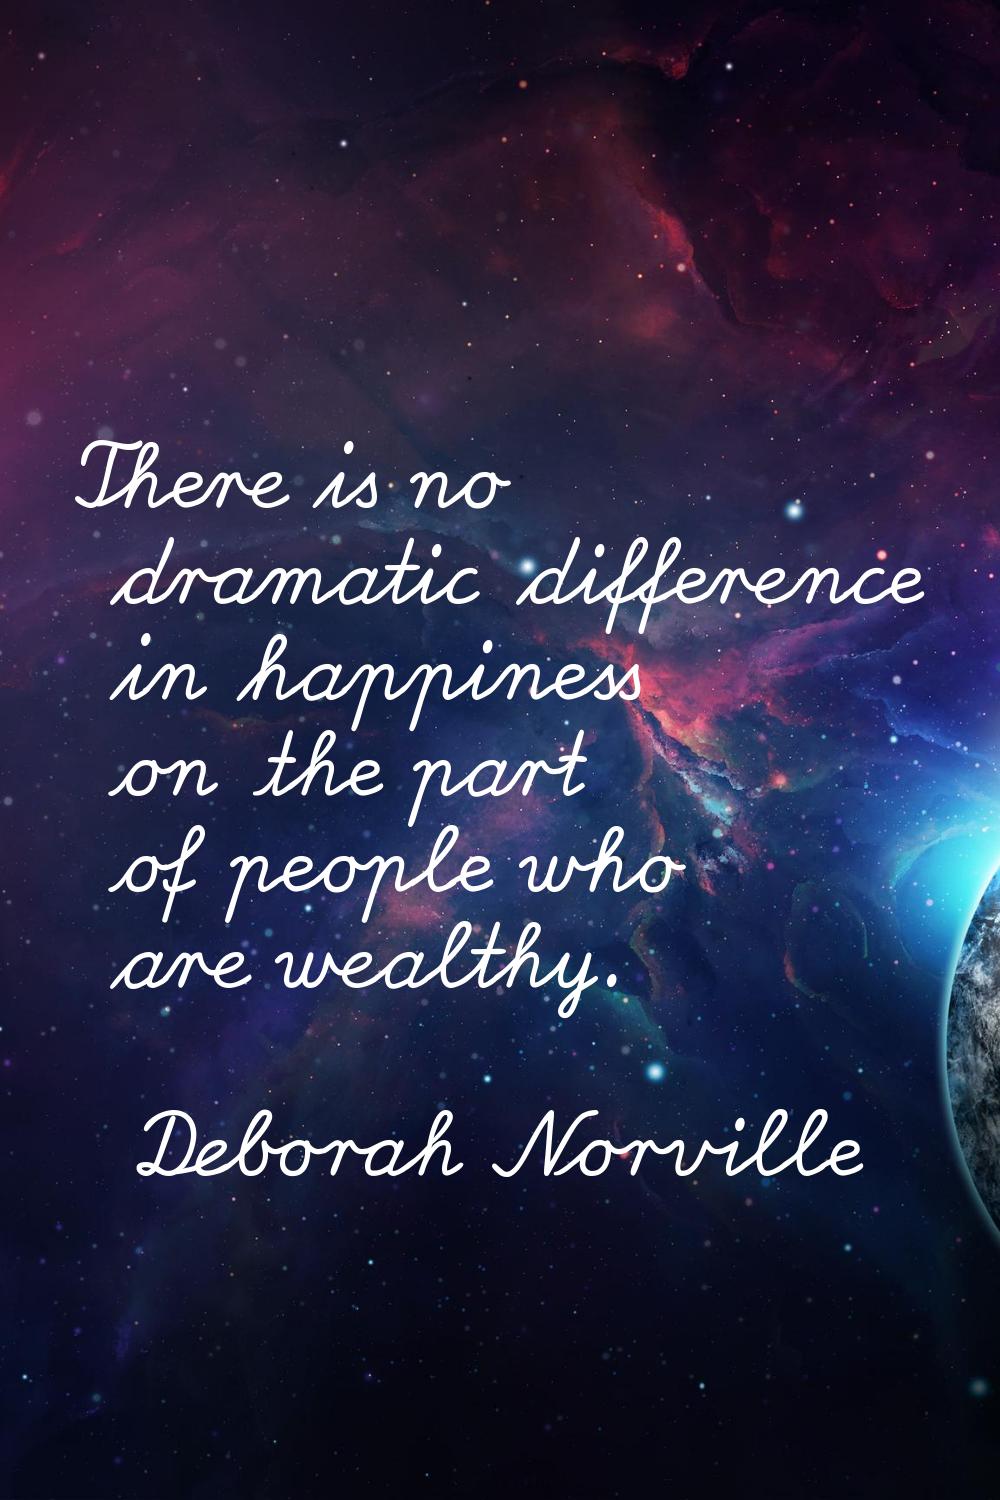 There is no dramatic difference in happiness on the part of people who are wealthy.